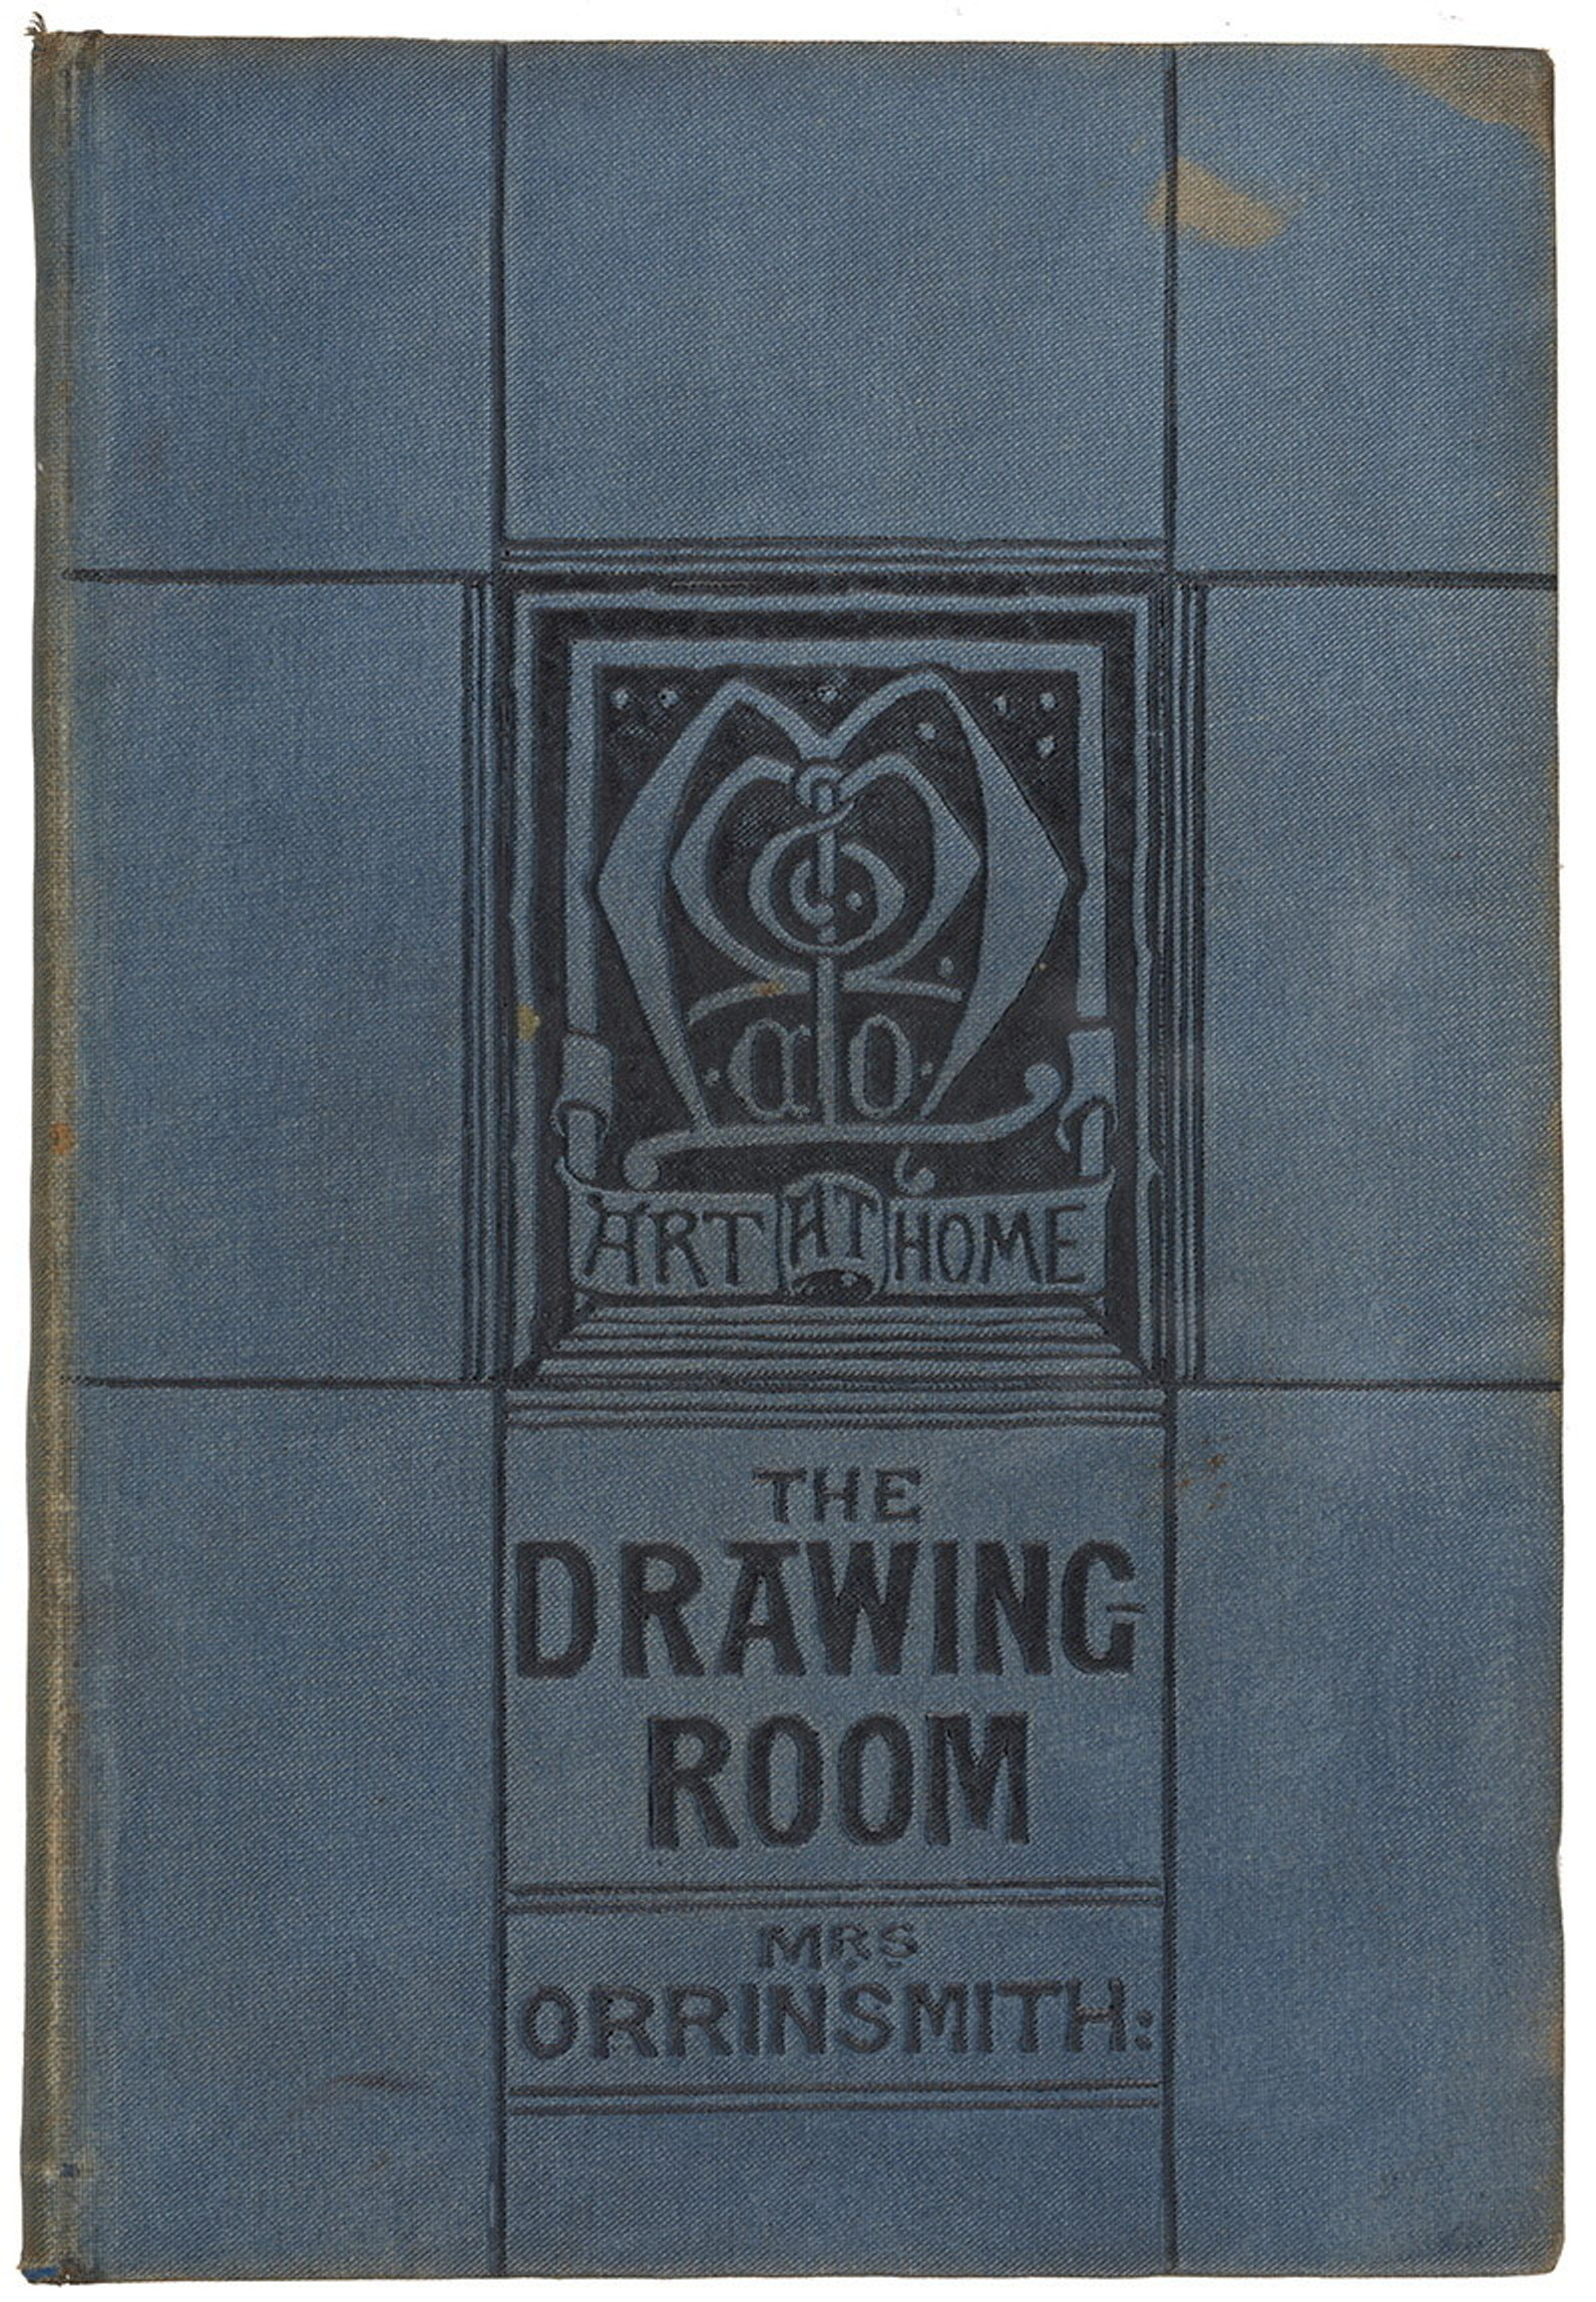  The drawing-room : its decorations and furniture by Mrs. Orrinsmith , 1878